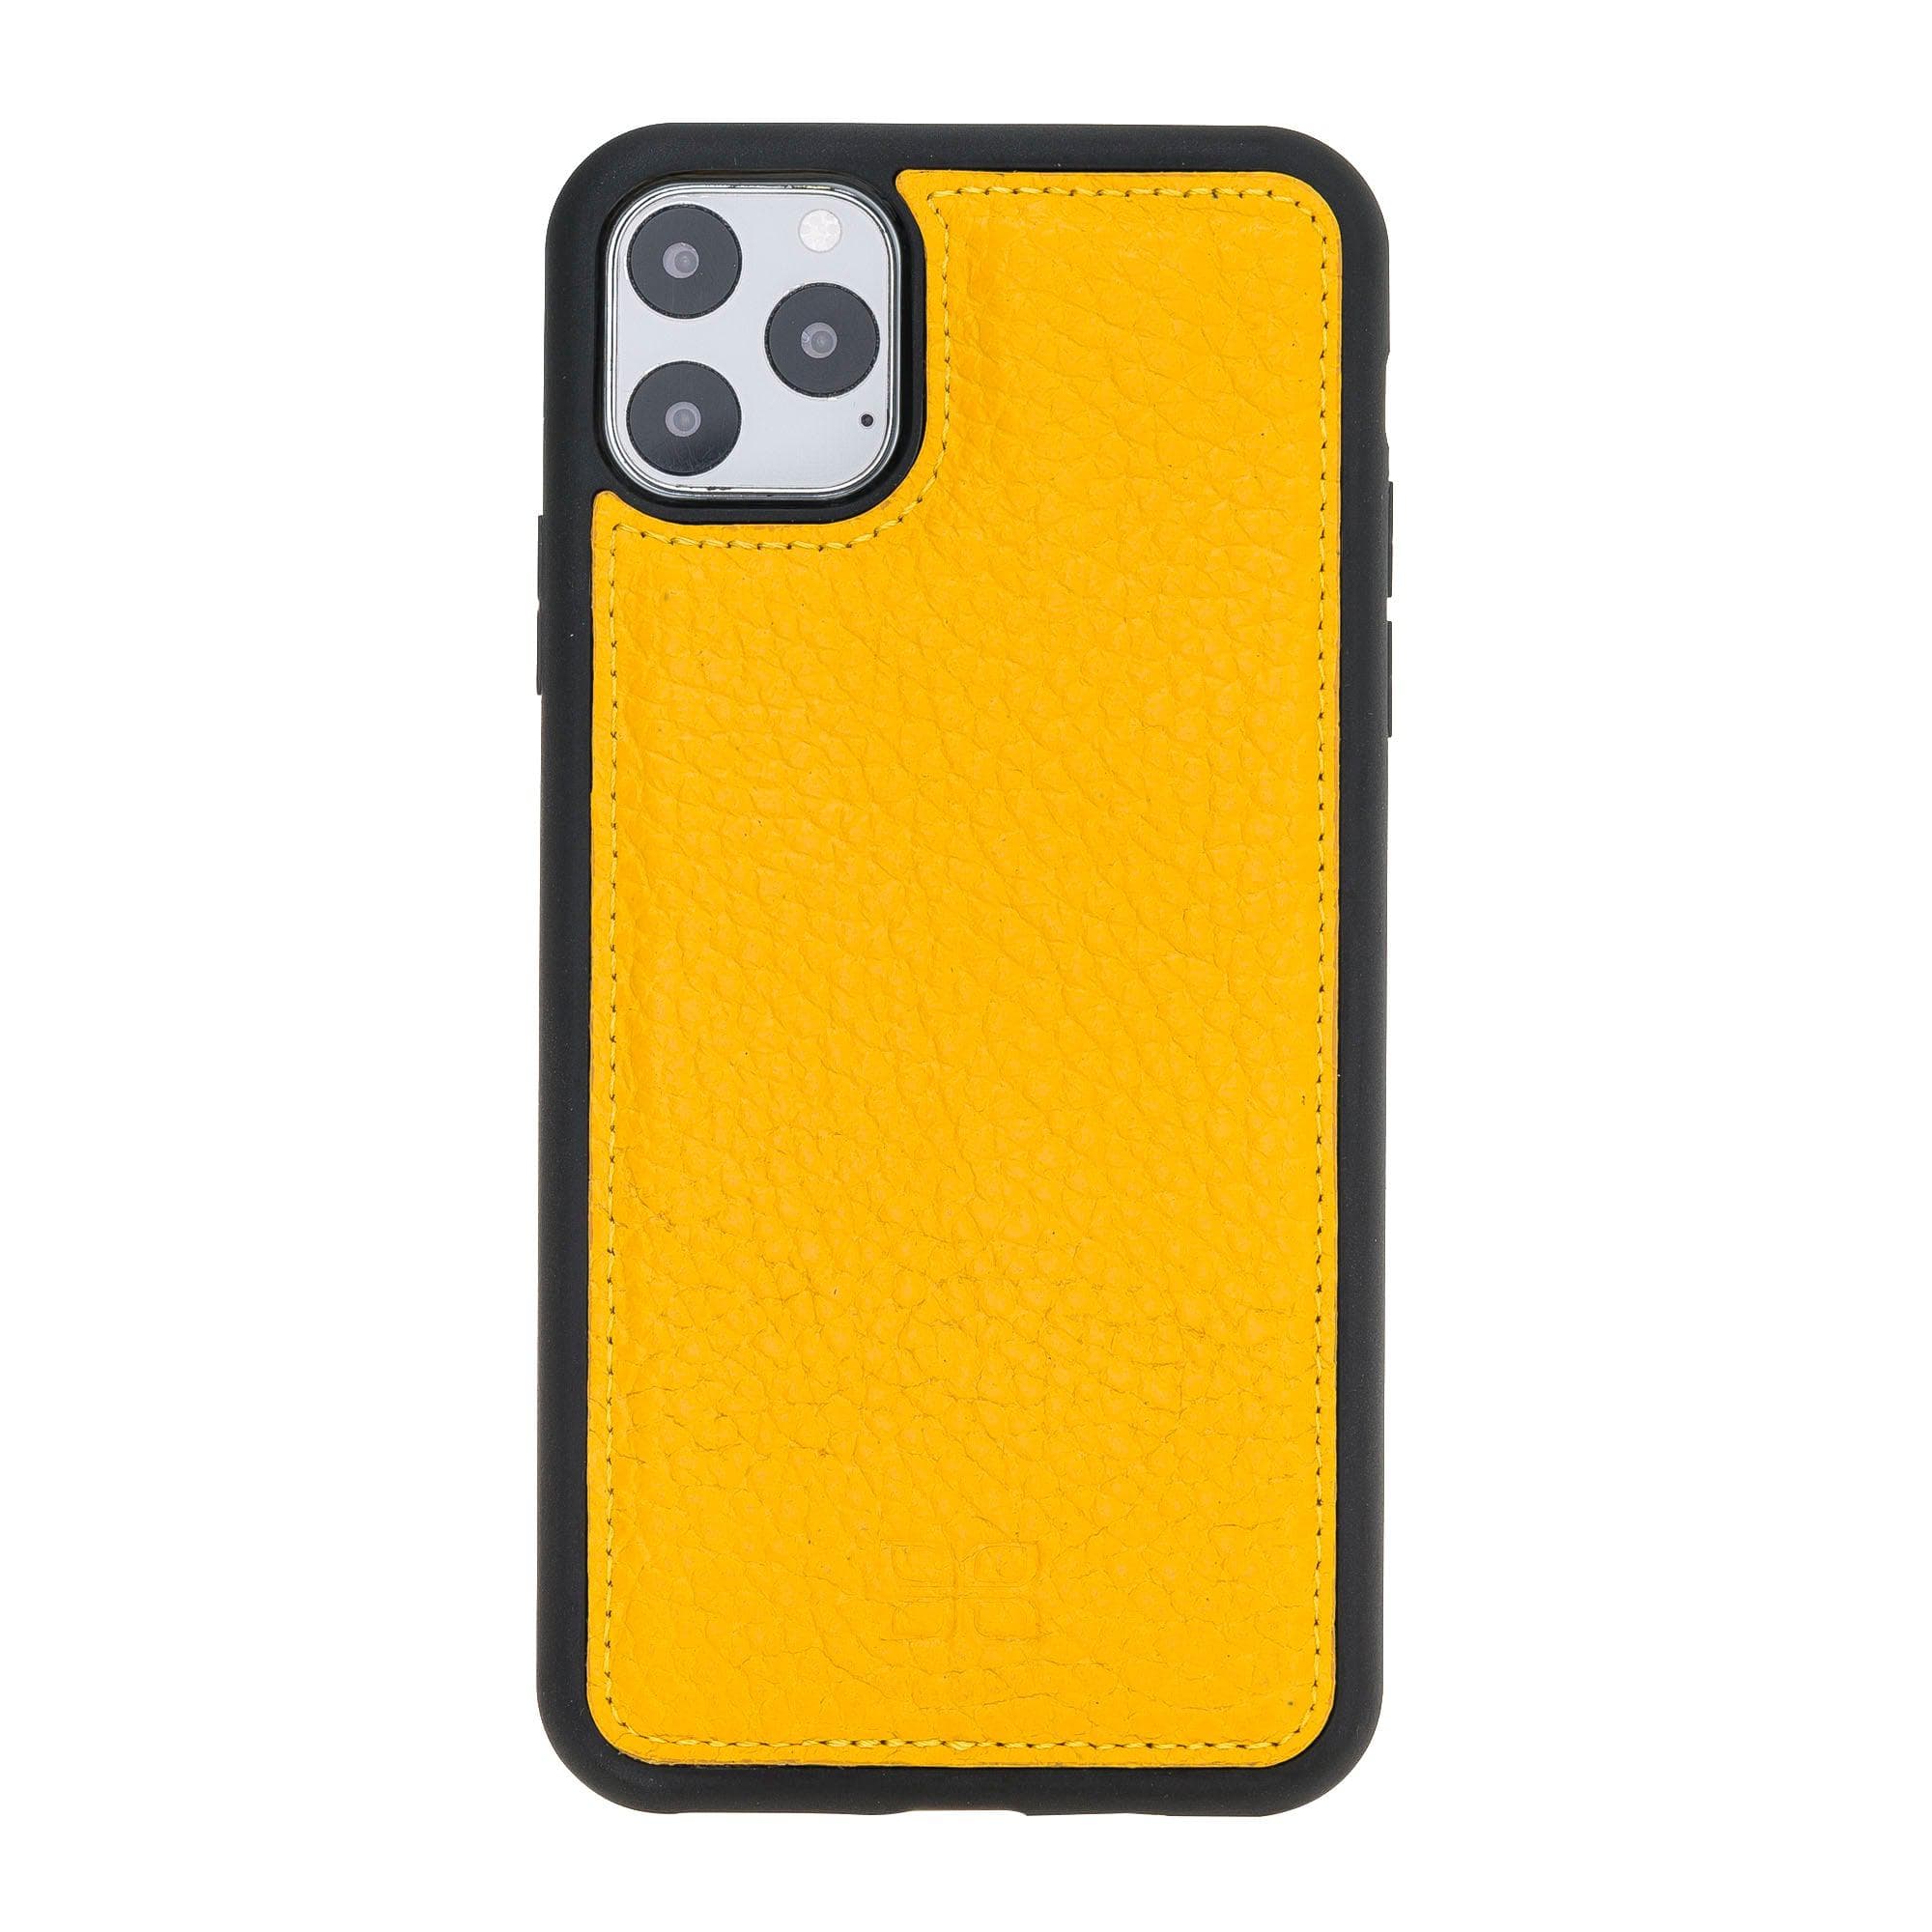 Flex Cover Leather Back Cover Case for Apple iPhone 11 Series iPhone 11 Promax 6.5" / Yellow Bouletta LTD